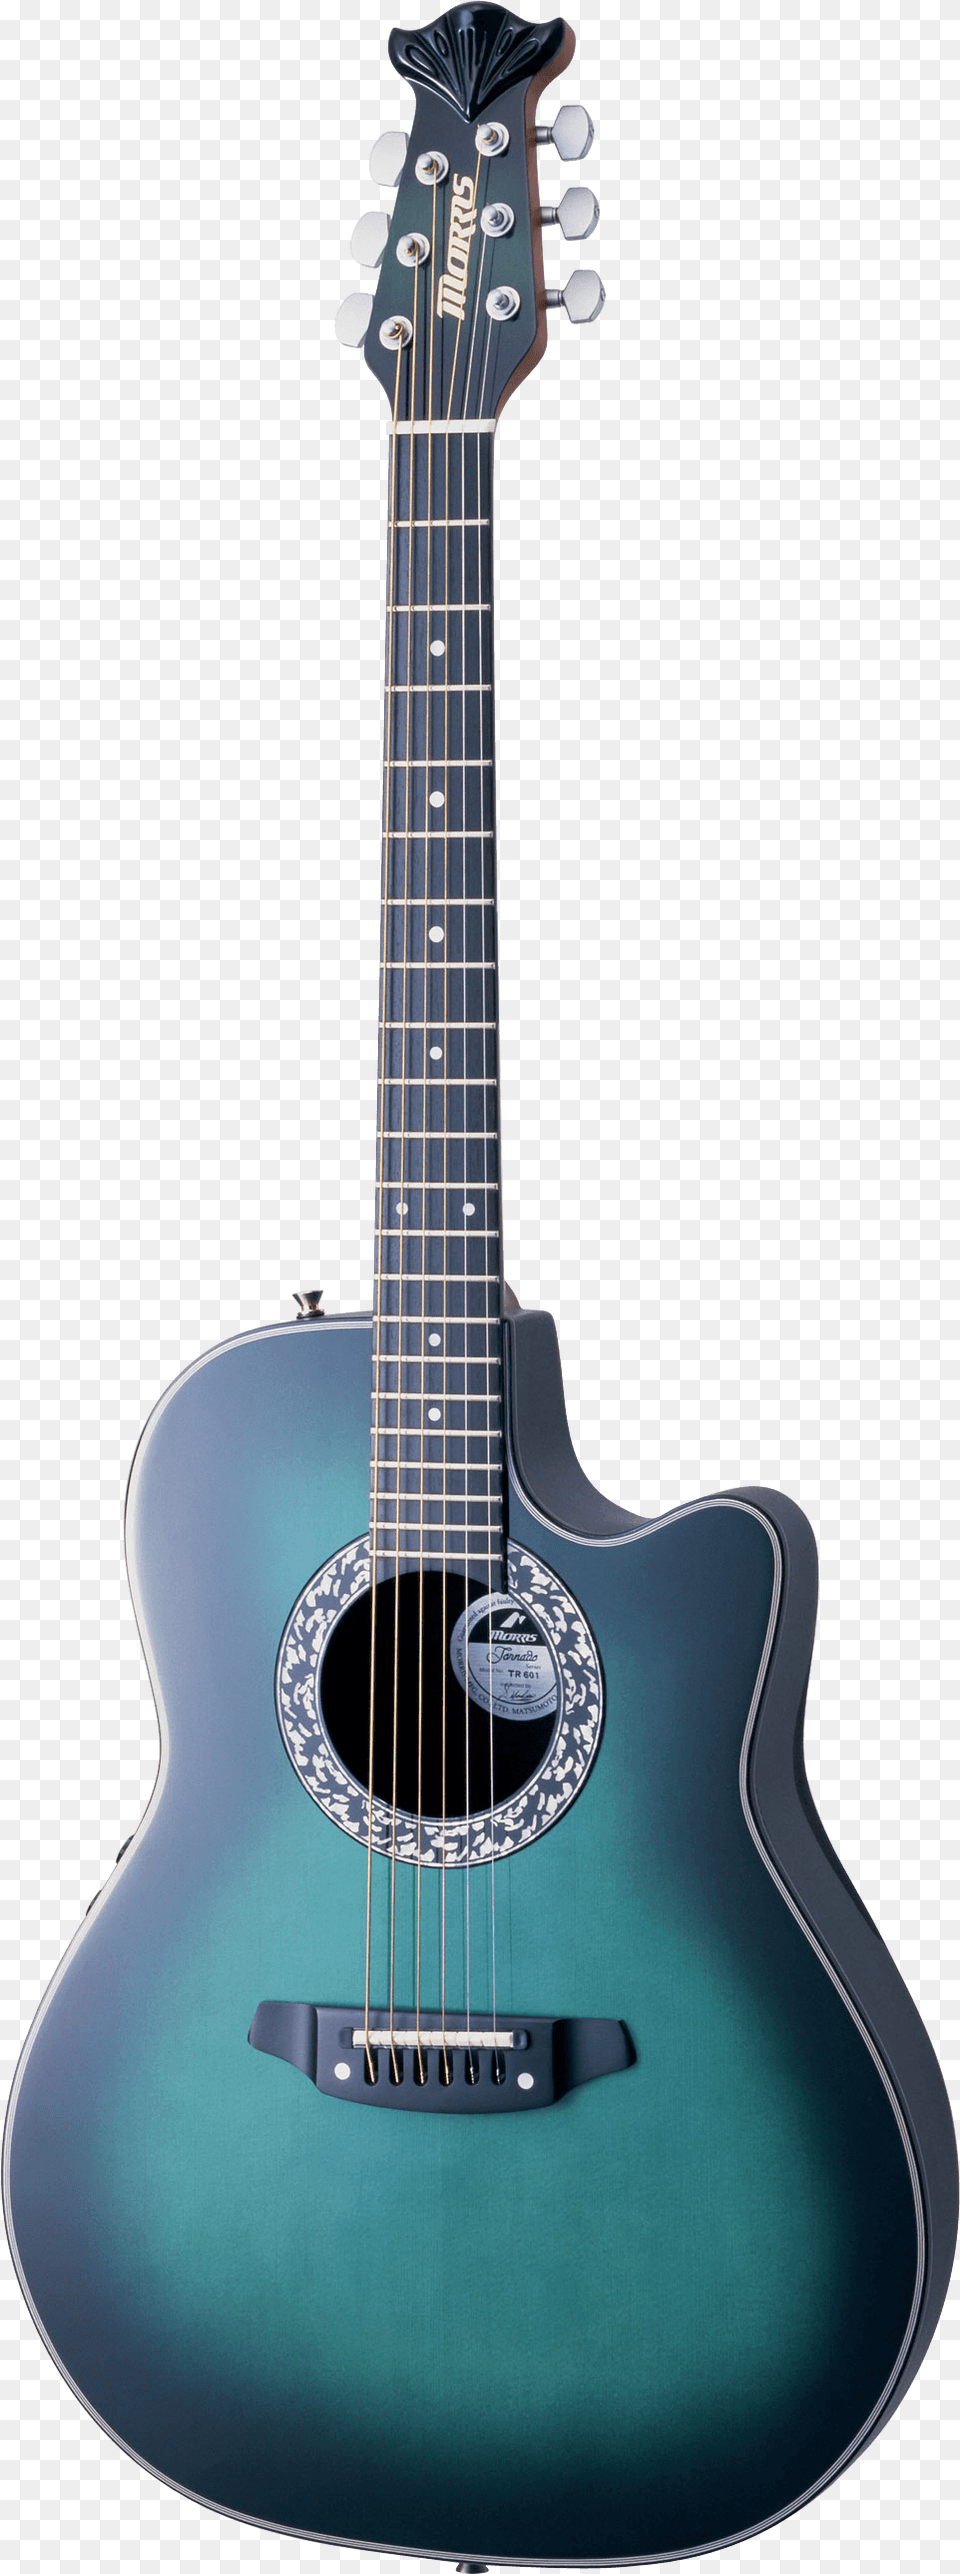 Acoustic Blue Guitar, Musical Instrument, Bass Guitar Free Png Download